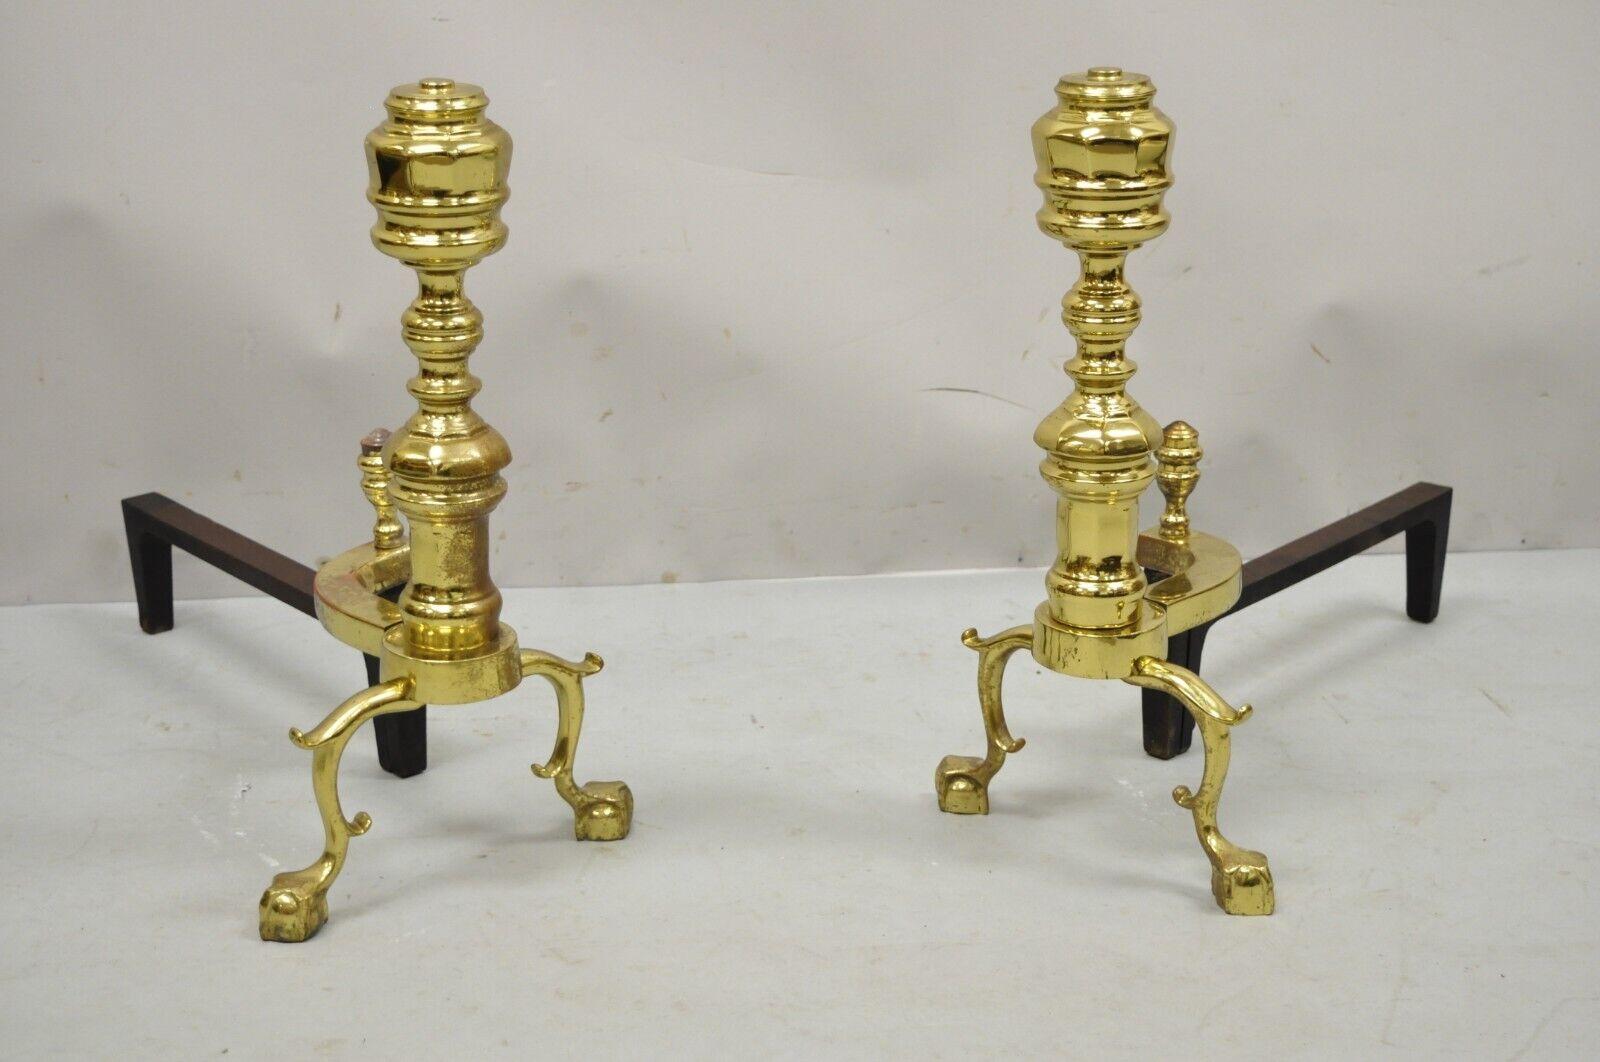 The Harvin Co brass federal style branch leg ball and claw andirons - a pair. Item features branch legs, ball and claw feet, original stamp, quality American craftsmanship, great style and form. Circa mid to late 20th century. 
Measurements: 18.5